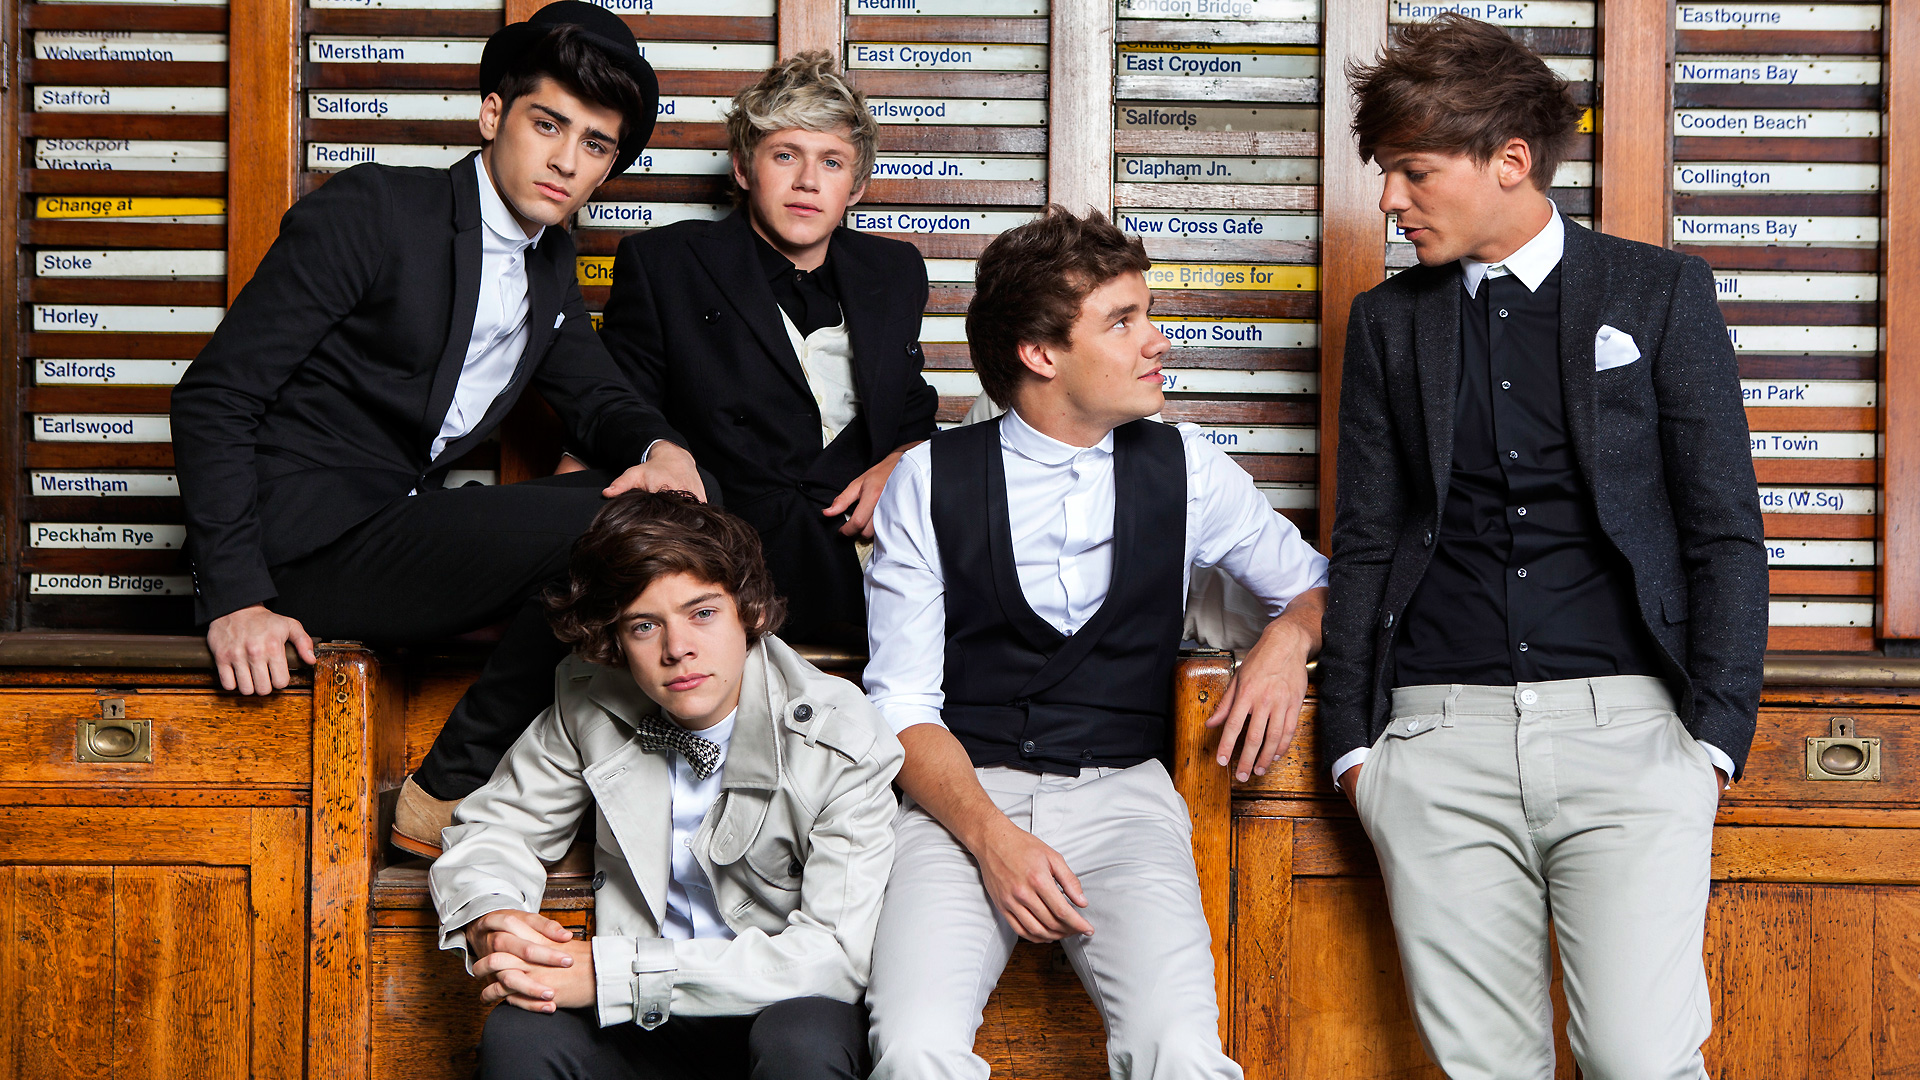 Music One Direction 1920x1080